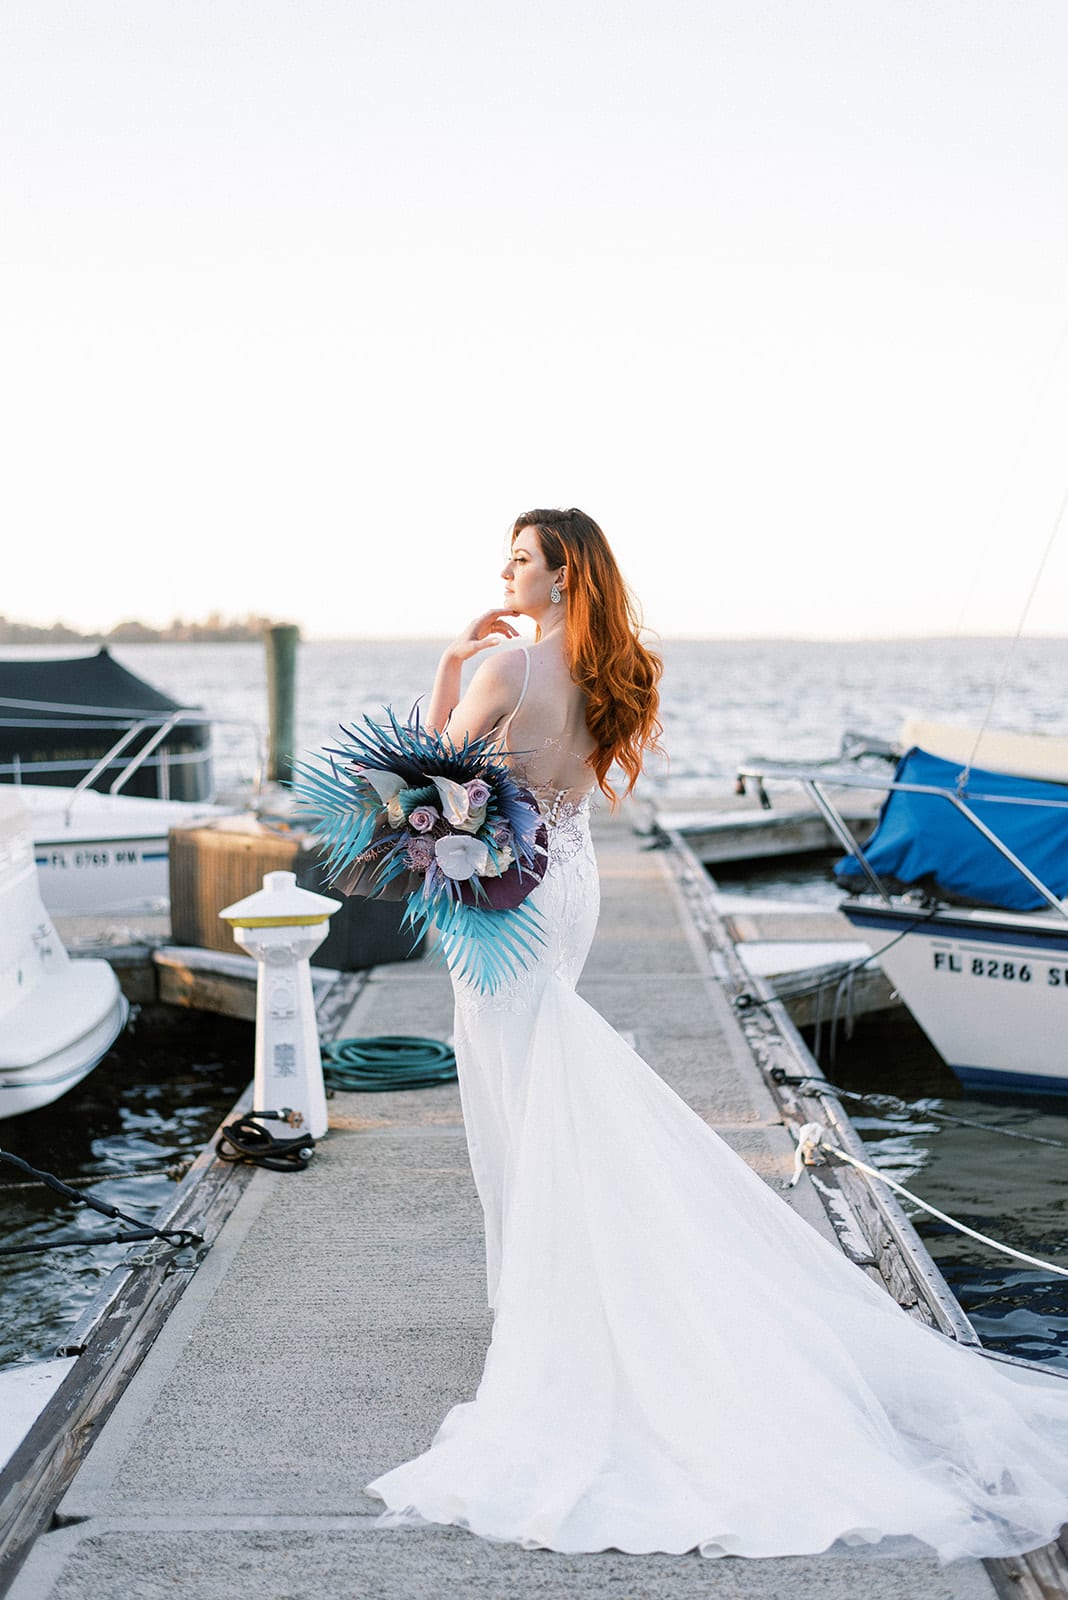 Top Reasons To Hire A Wedding Planner with The little mermaid inspired wedding at mission inn resort bride by the boat dock posing with her purple and blue wedding bouquet looking off in the distance and her back is to the camera